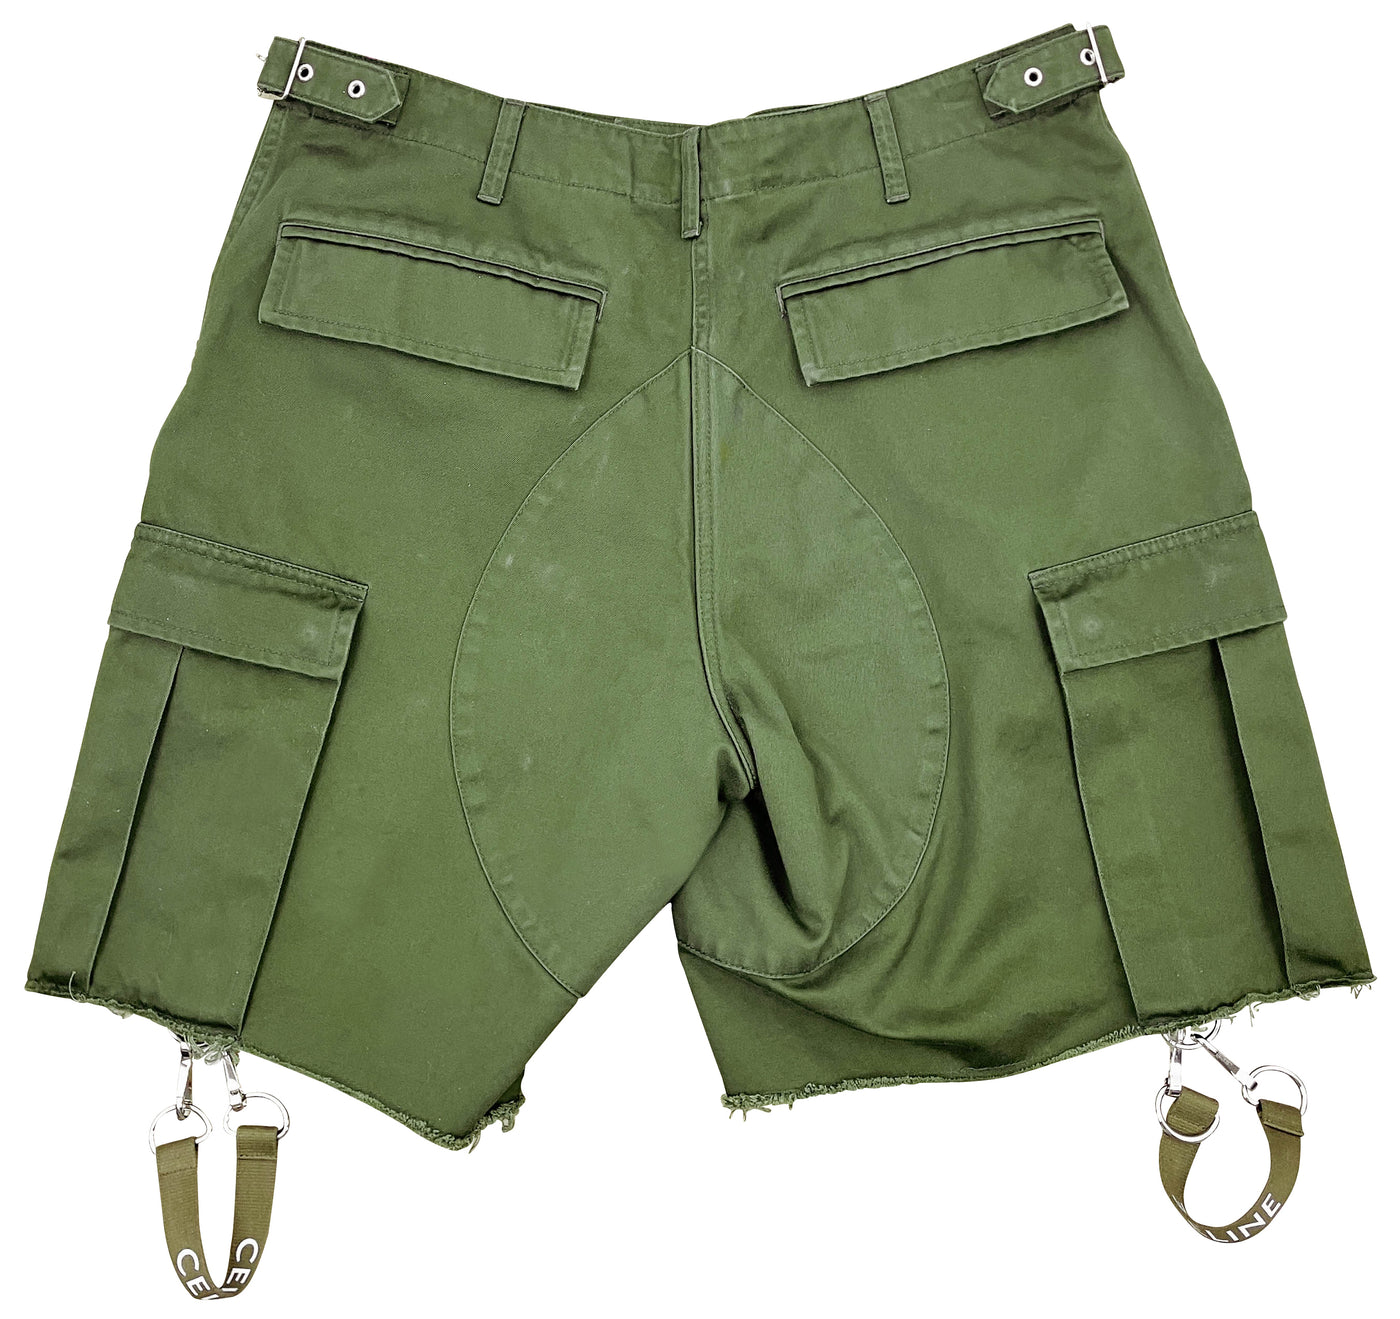 Celine Shorts with Celine Straps in Army Green - Discounts on Celine at UAL